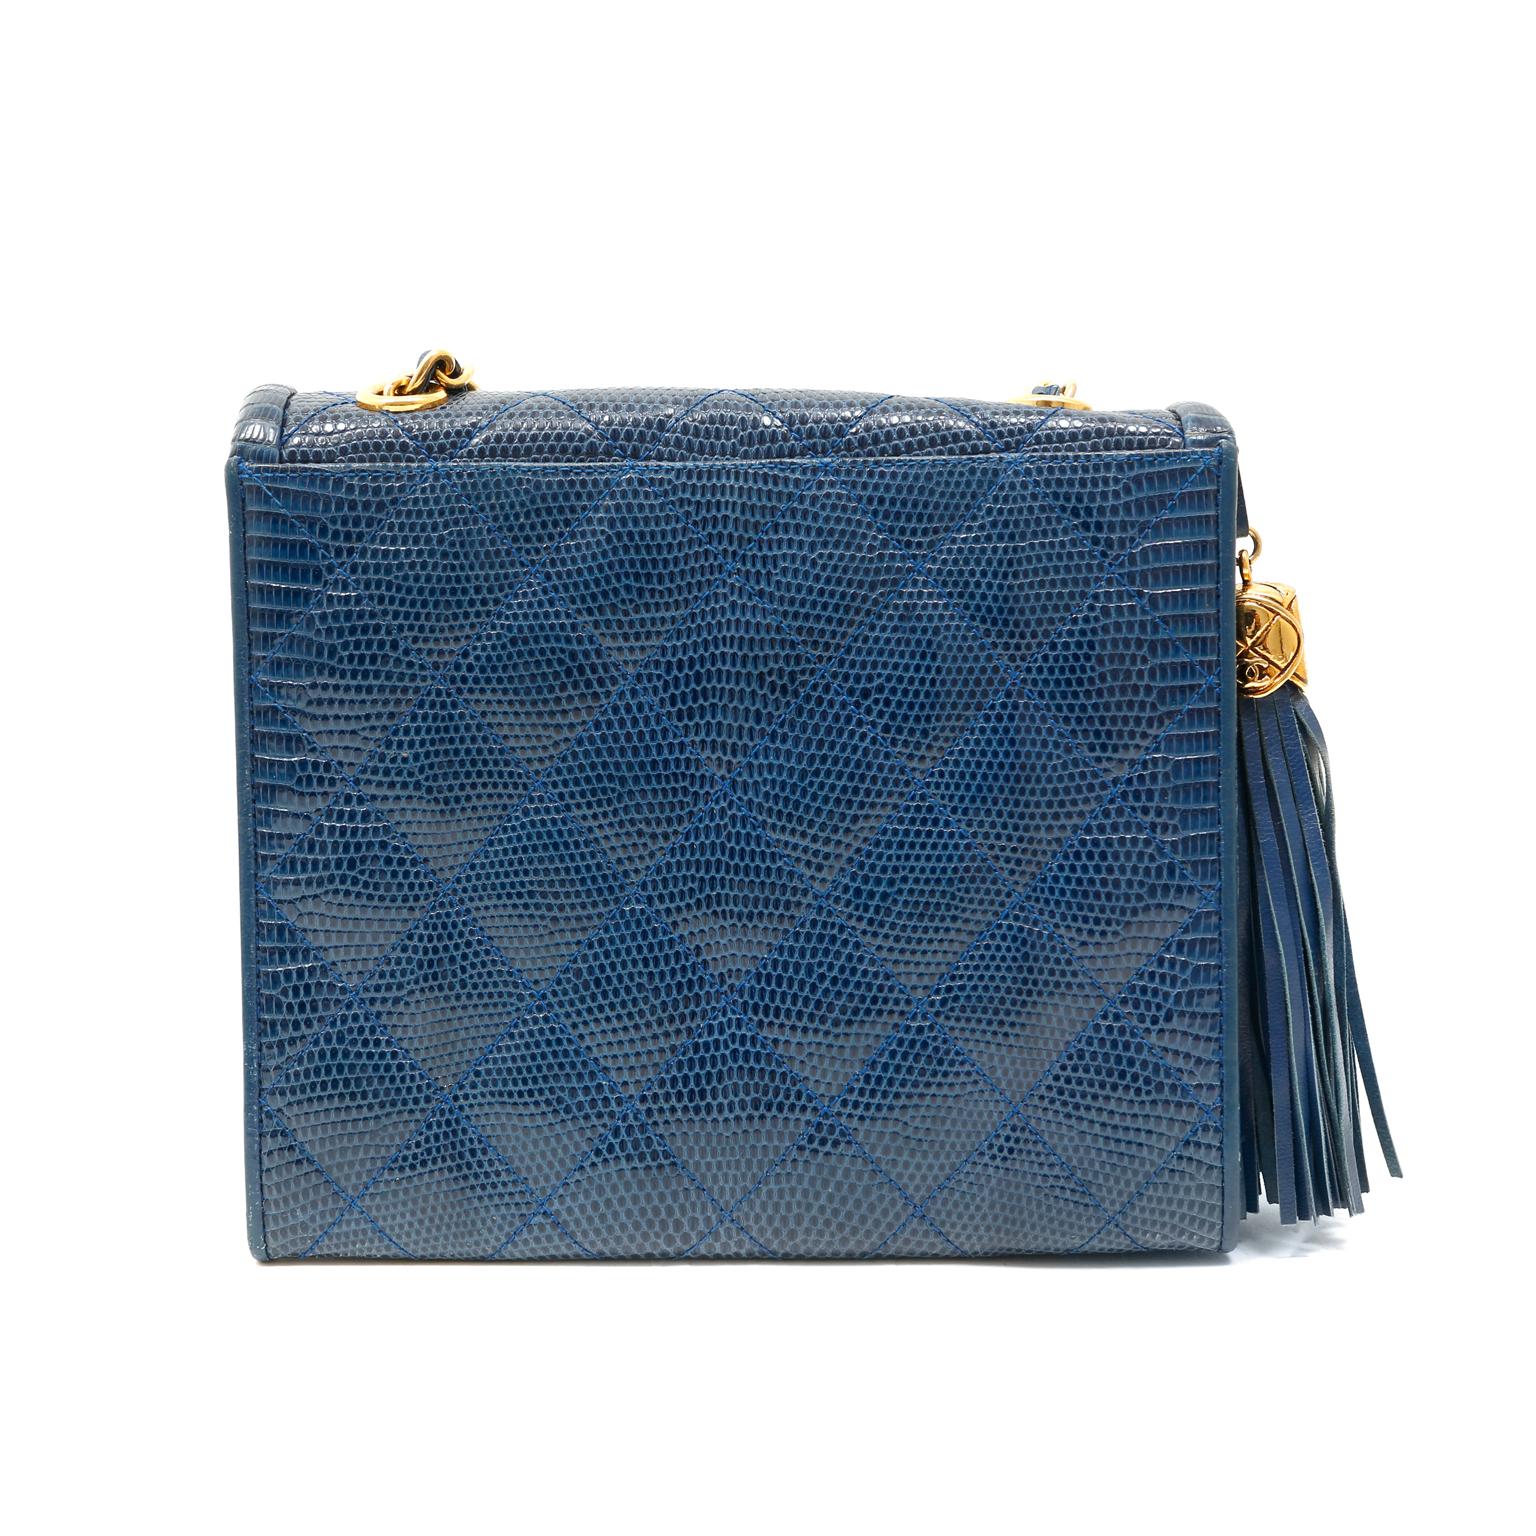 This authentic Chanel Blue Lizard Double Flap Envelope Bag is in excellent vintage condition from the late 1980's- early 1990's.  The elegant silhouette is a true classic and a great addition to any wardrobe, especially in a rare exotic.
Slim blue